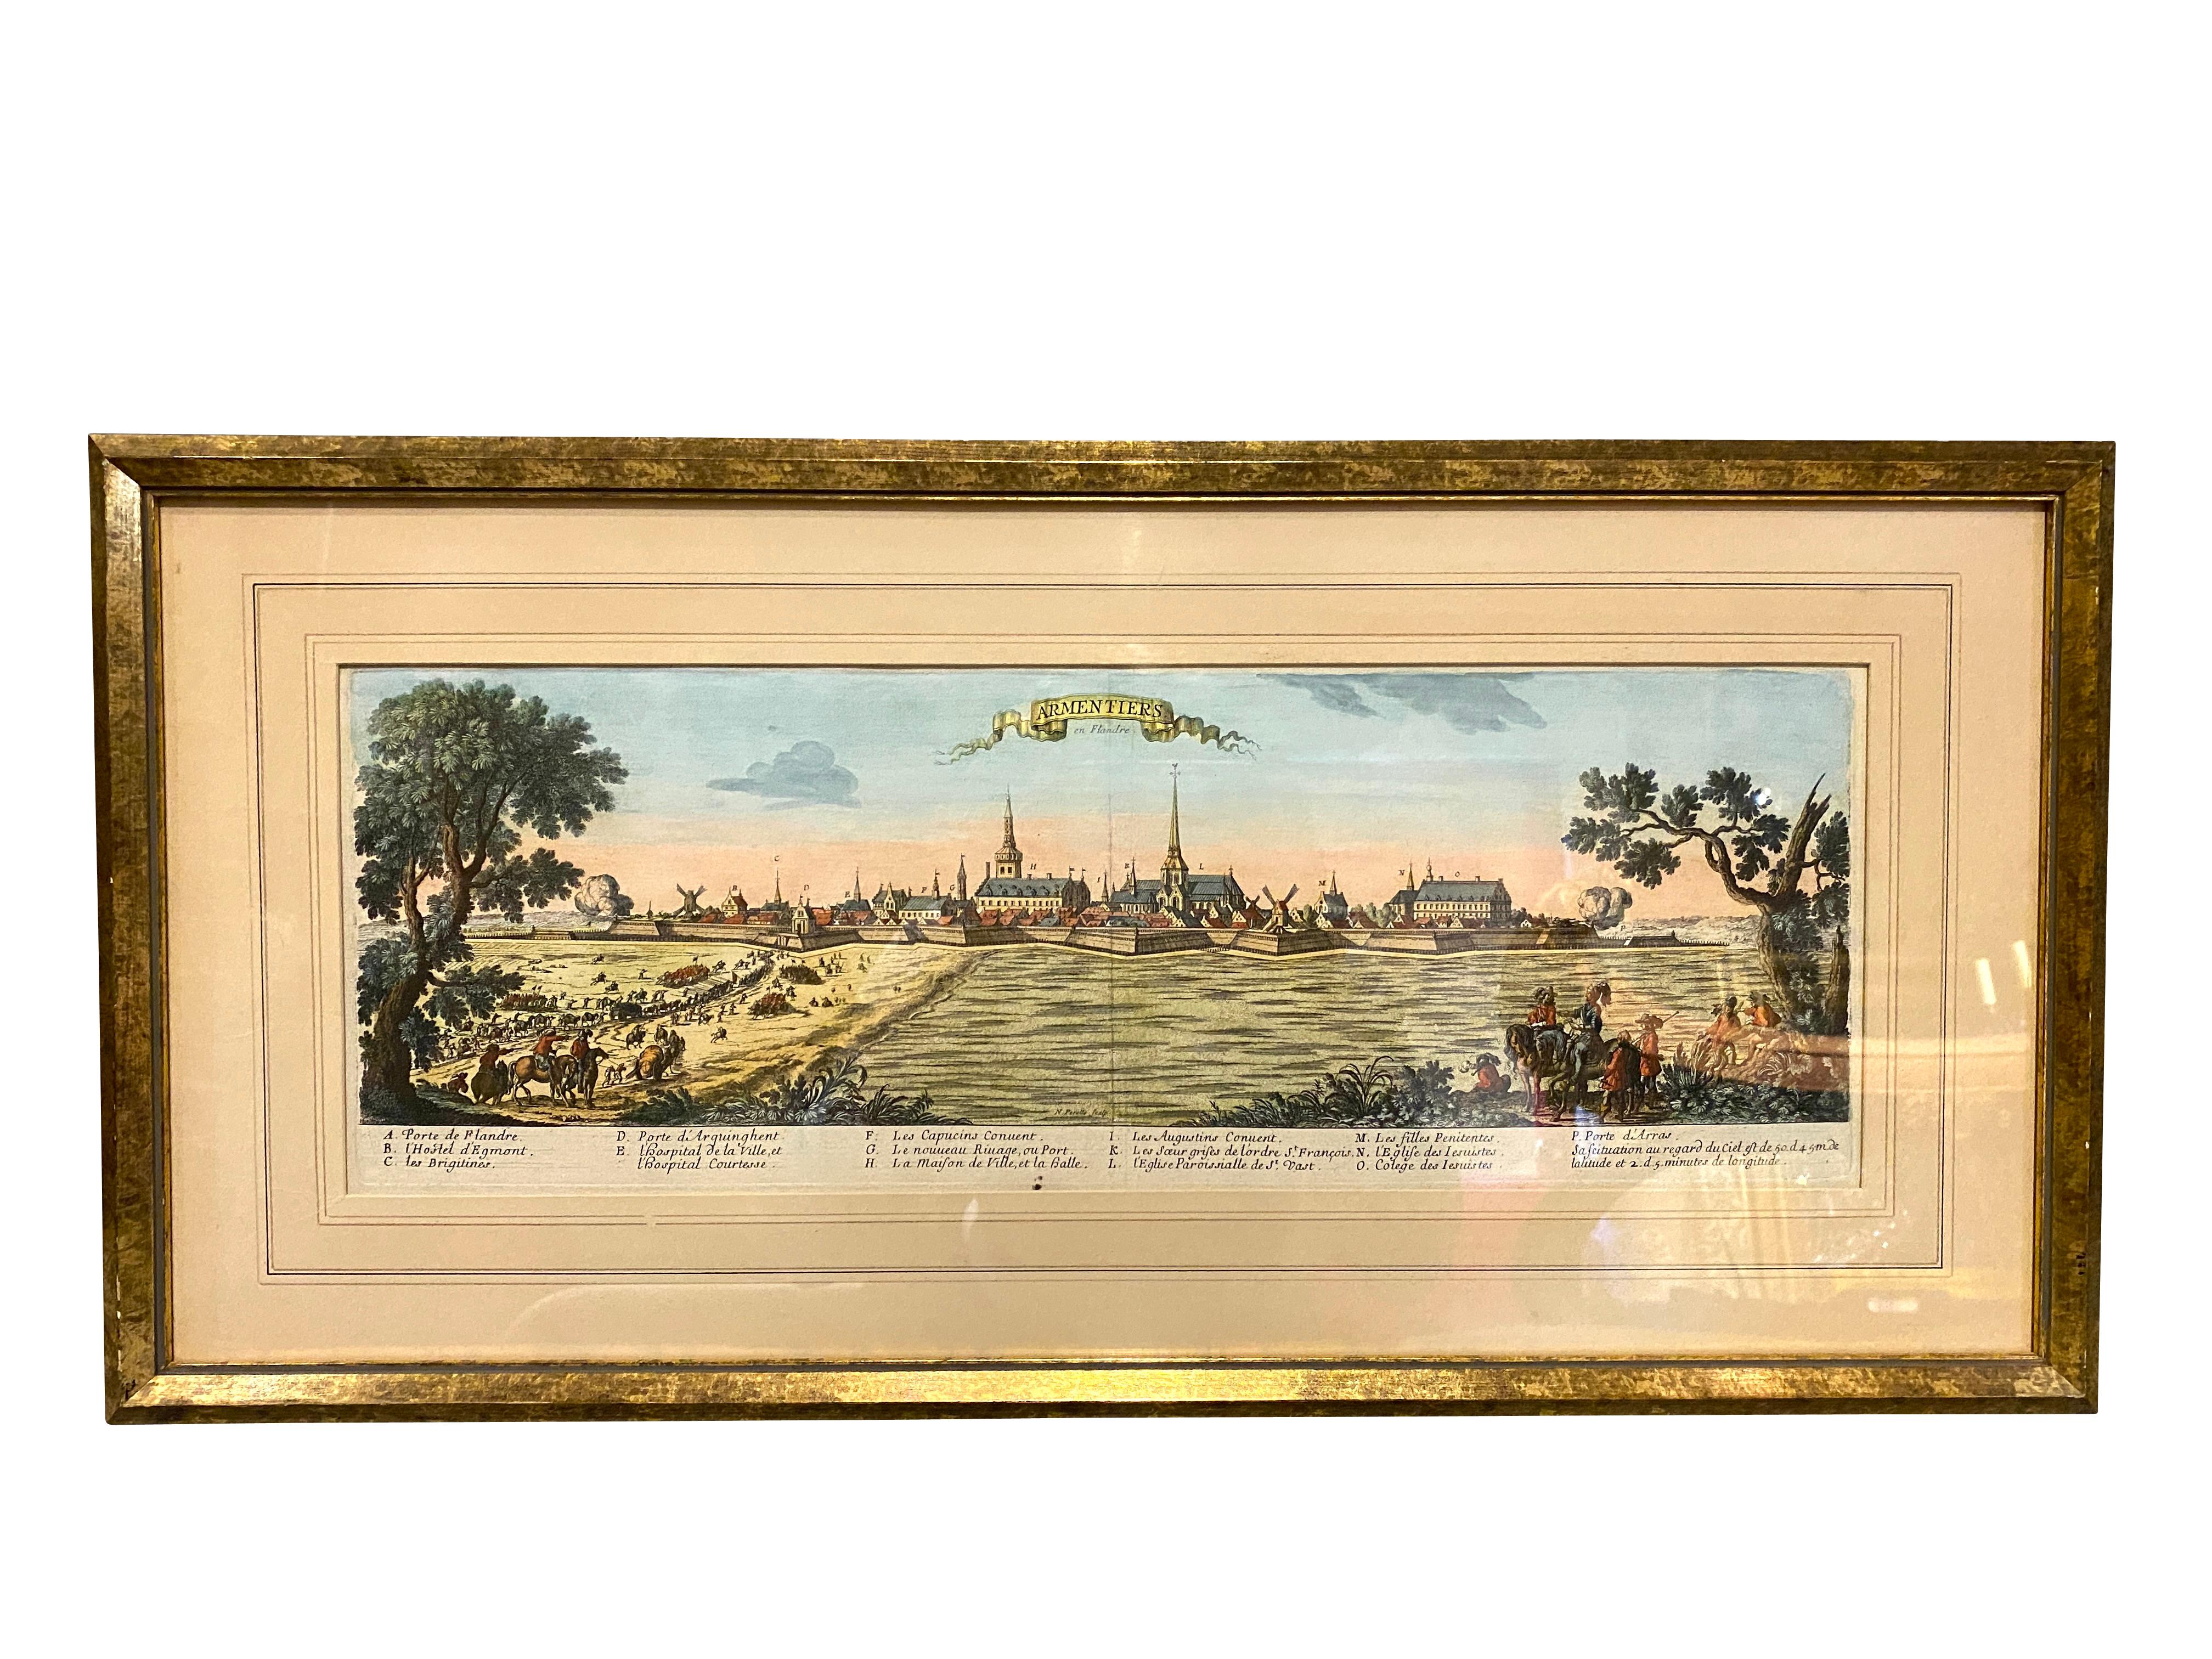 All featuring the communes of northern France including Rethel, Dunkirk, Mouzon, Gravelines etc. Framed and matted. By C.N. Cochin. Uninspected out of frames. Likely 19th century.